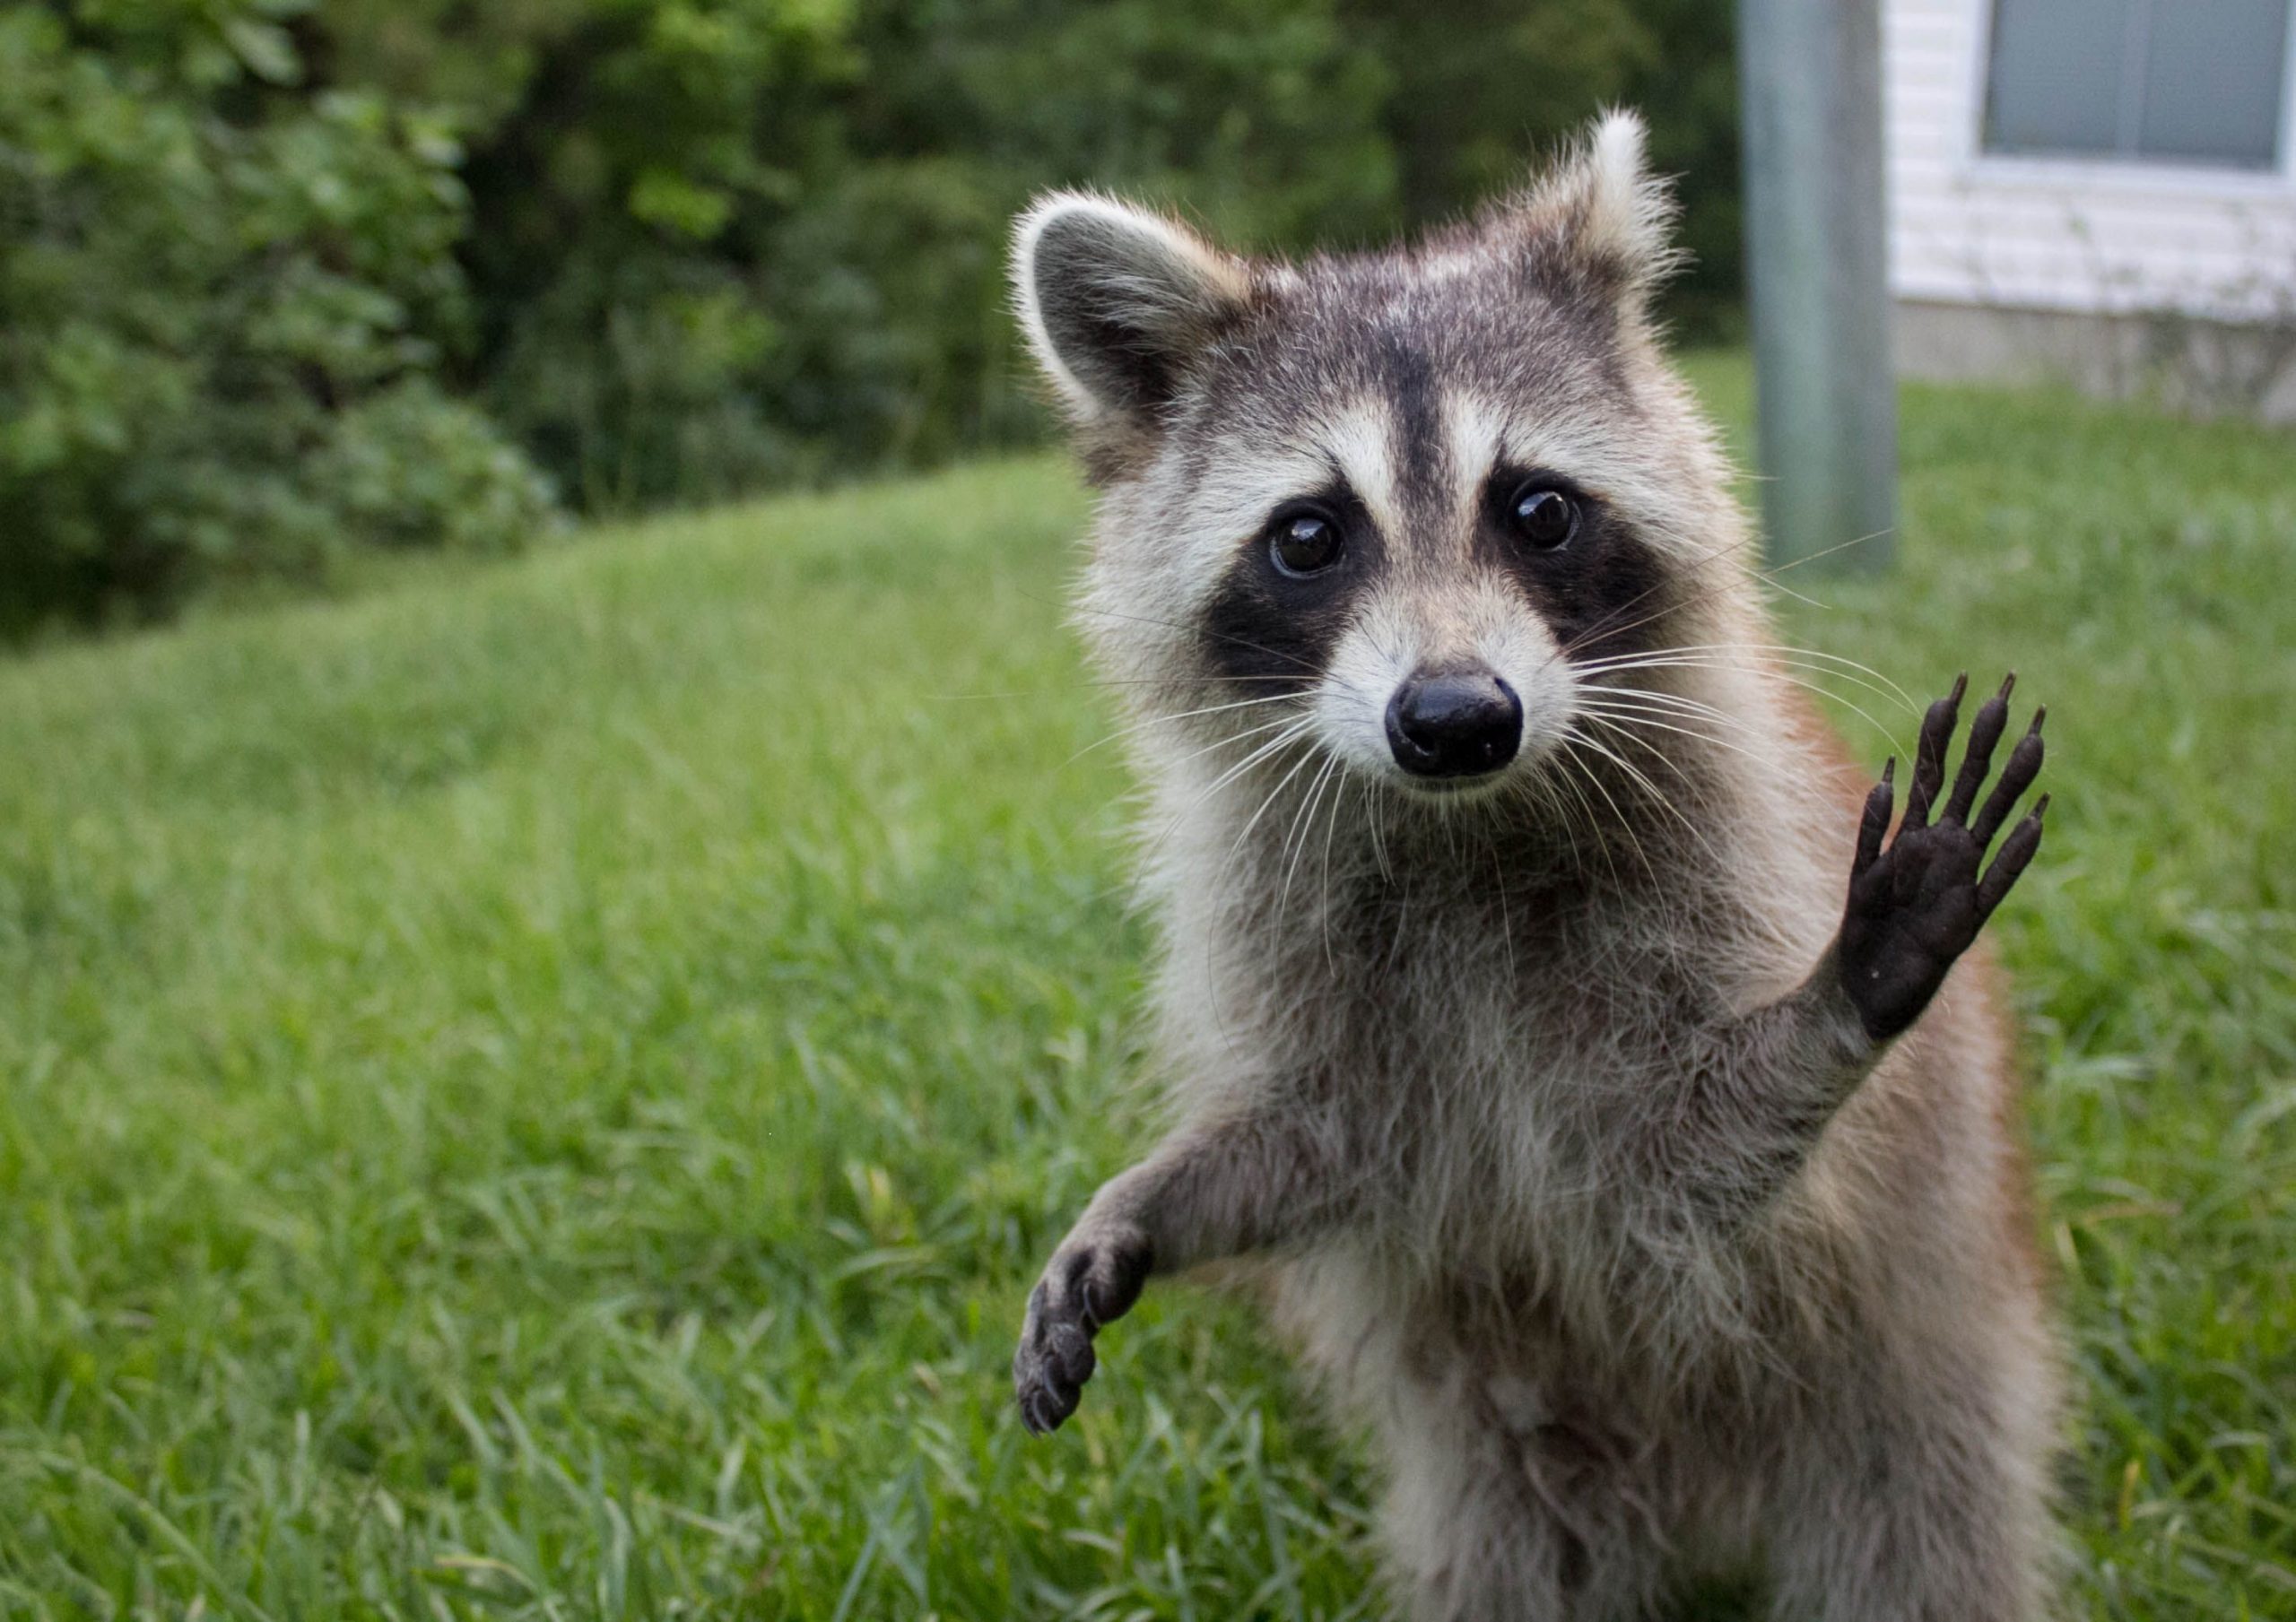 What States is it Legal to Have A Pet Raccoon?